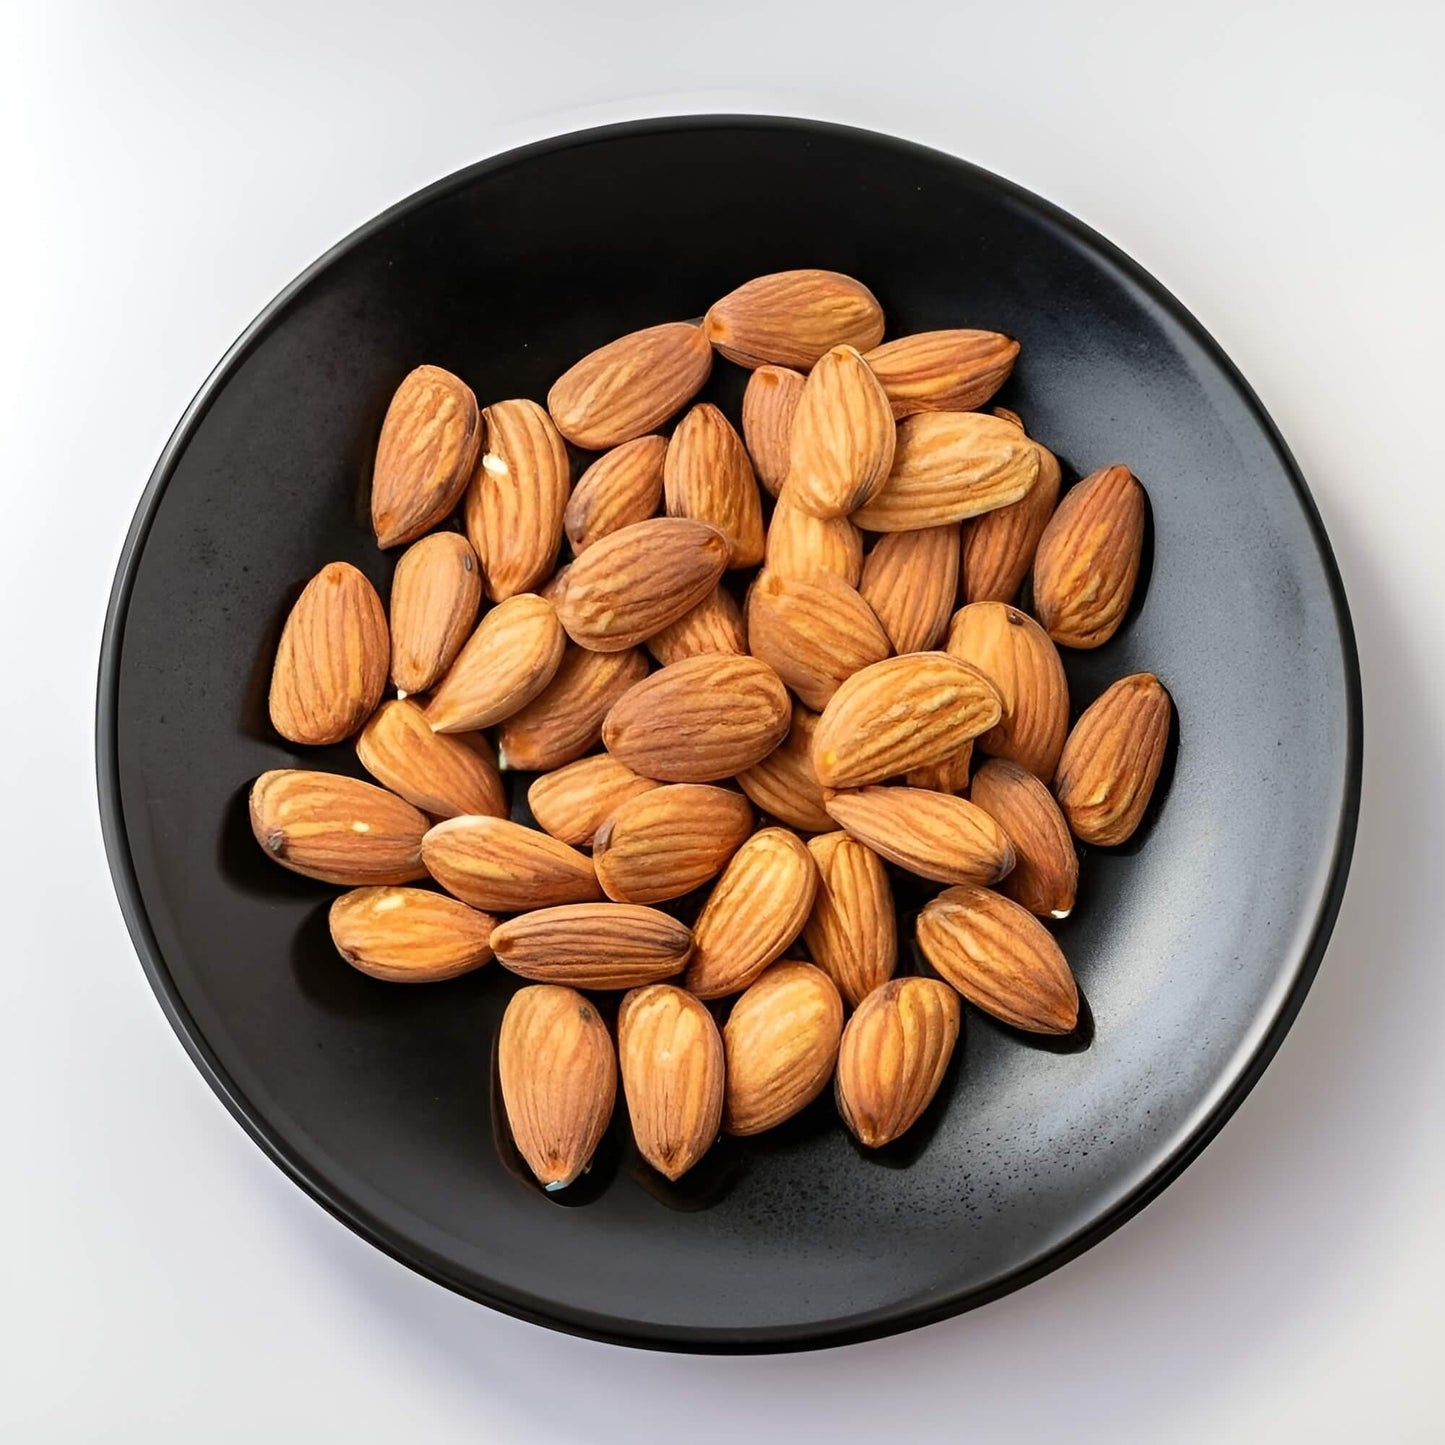 Whole Almonds - Nutrient-Rich and Ready for Snacking or Cooking | Britnuts